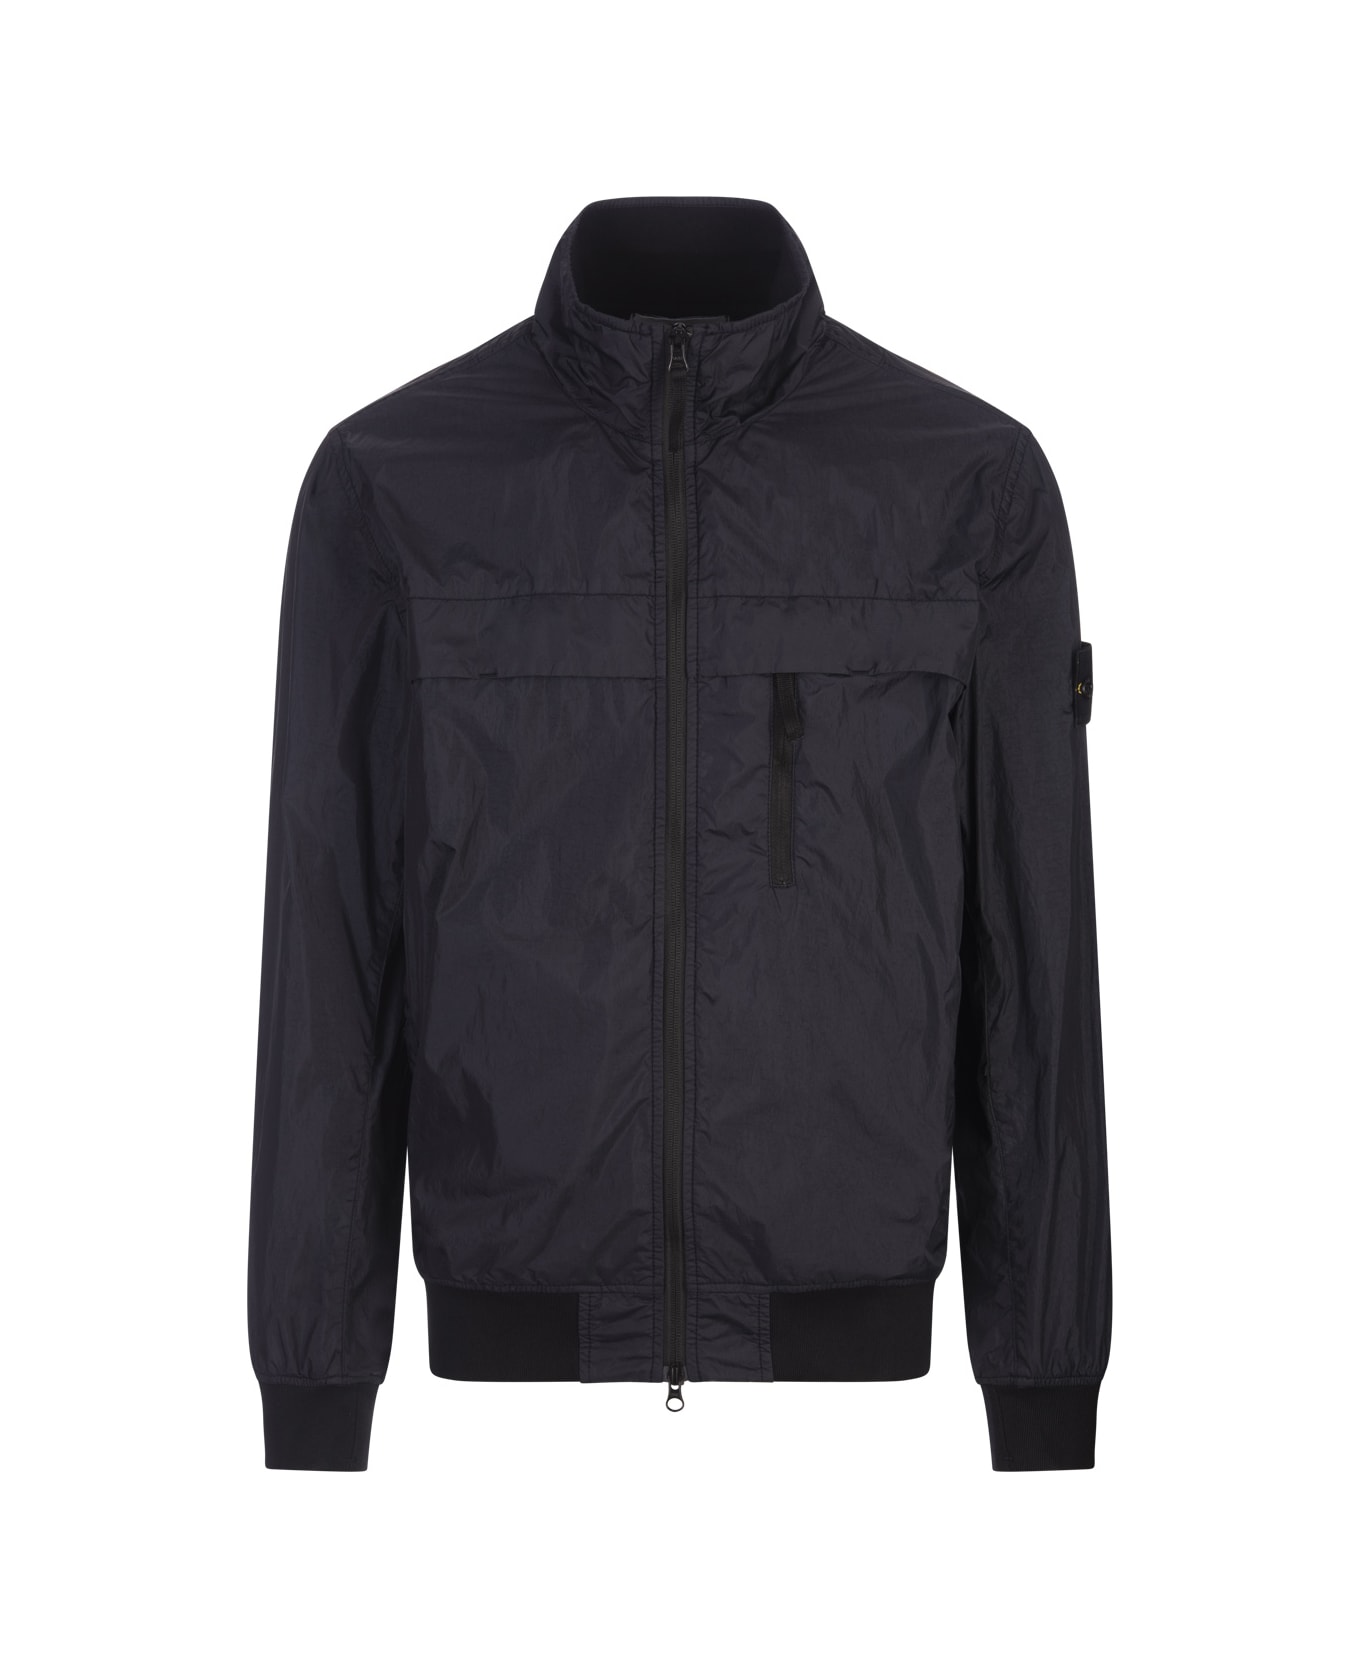 Stone Island Garment Dyed Crinkle Reps R-ny Jacket In Navy Blue - Blue